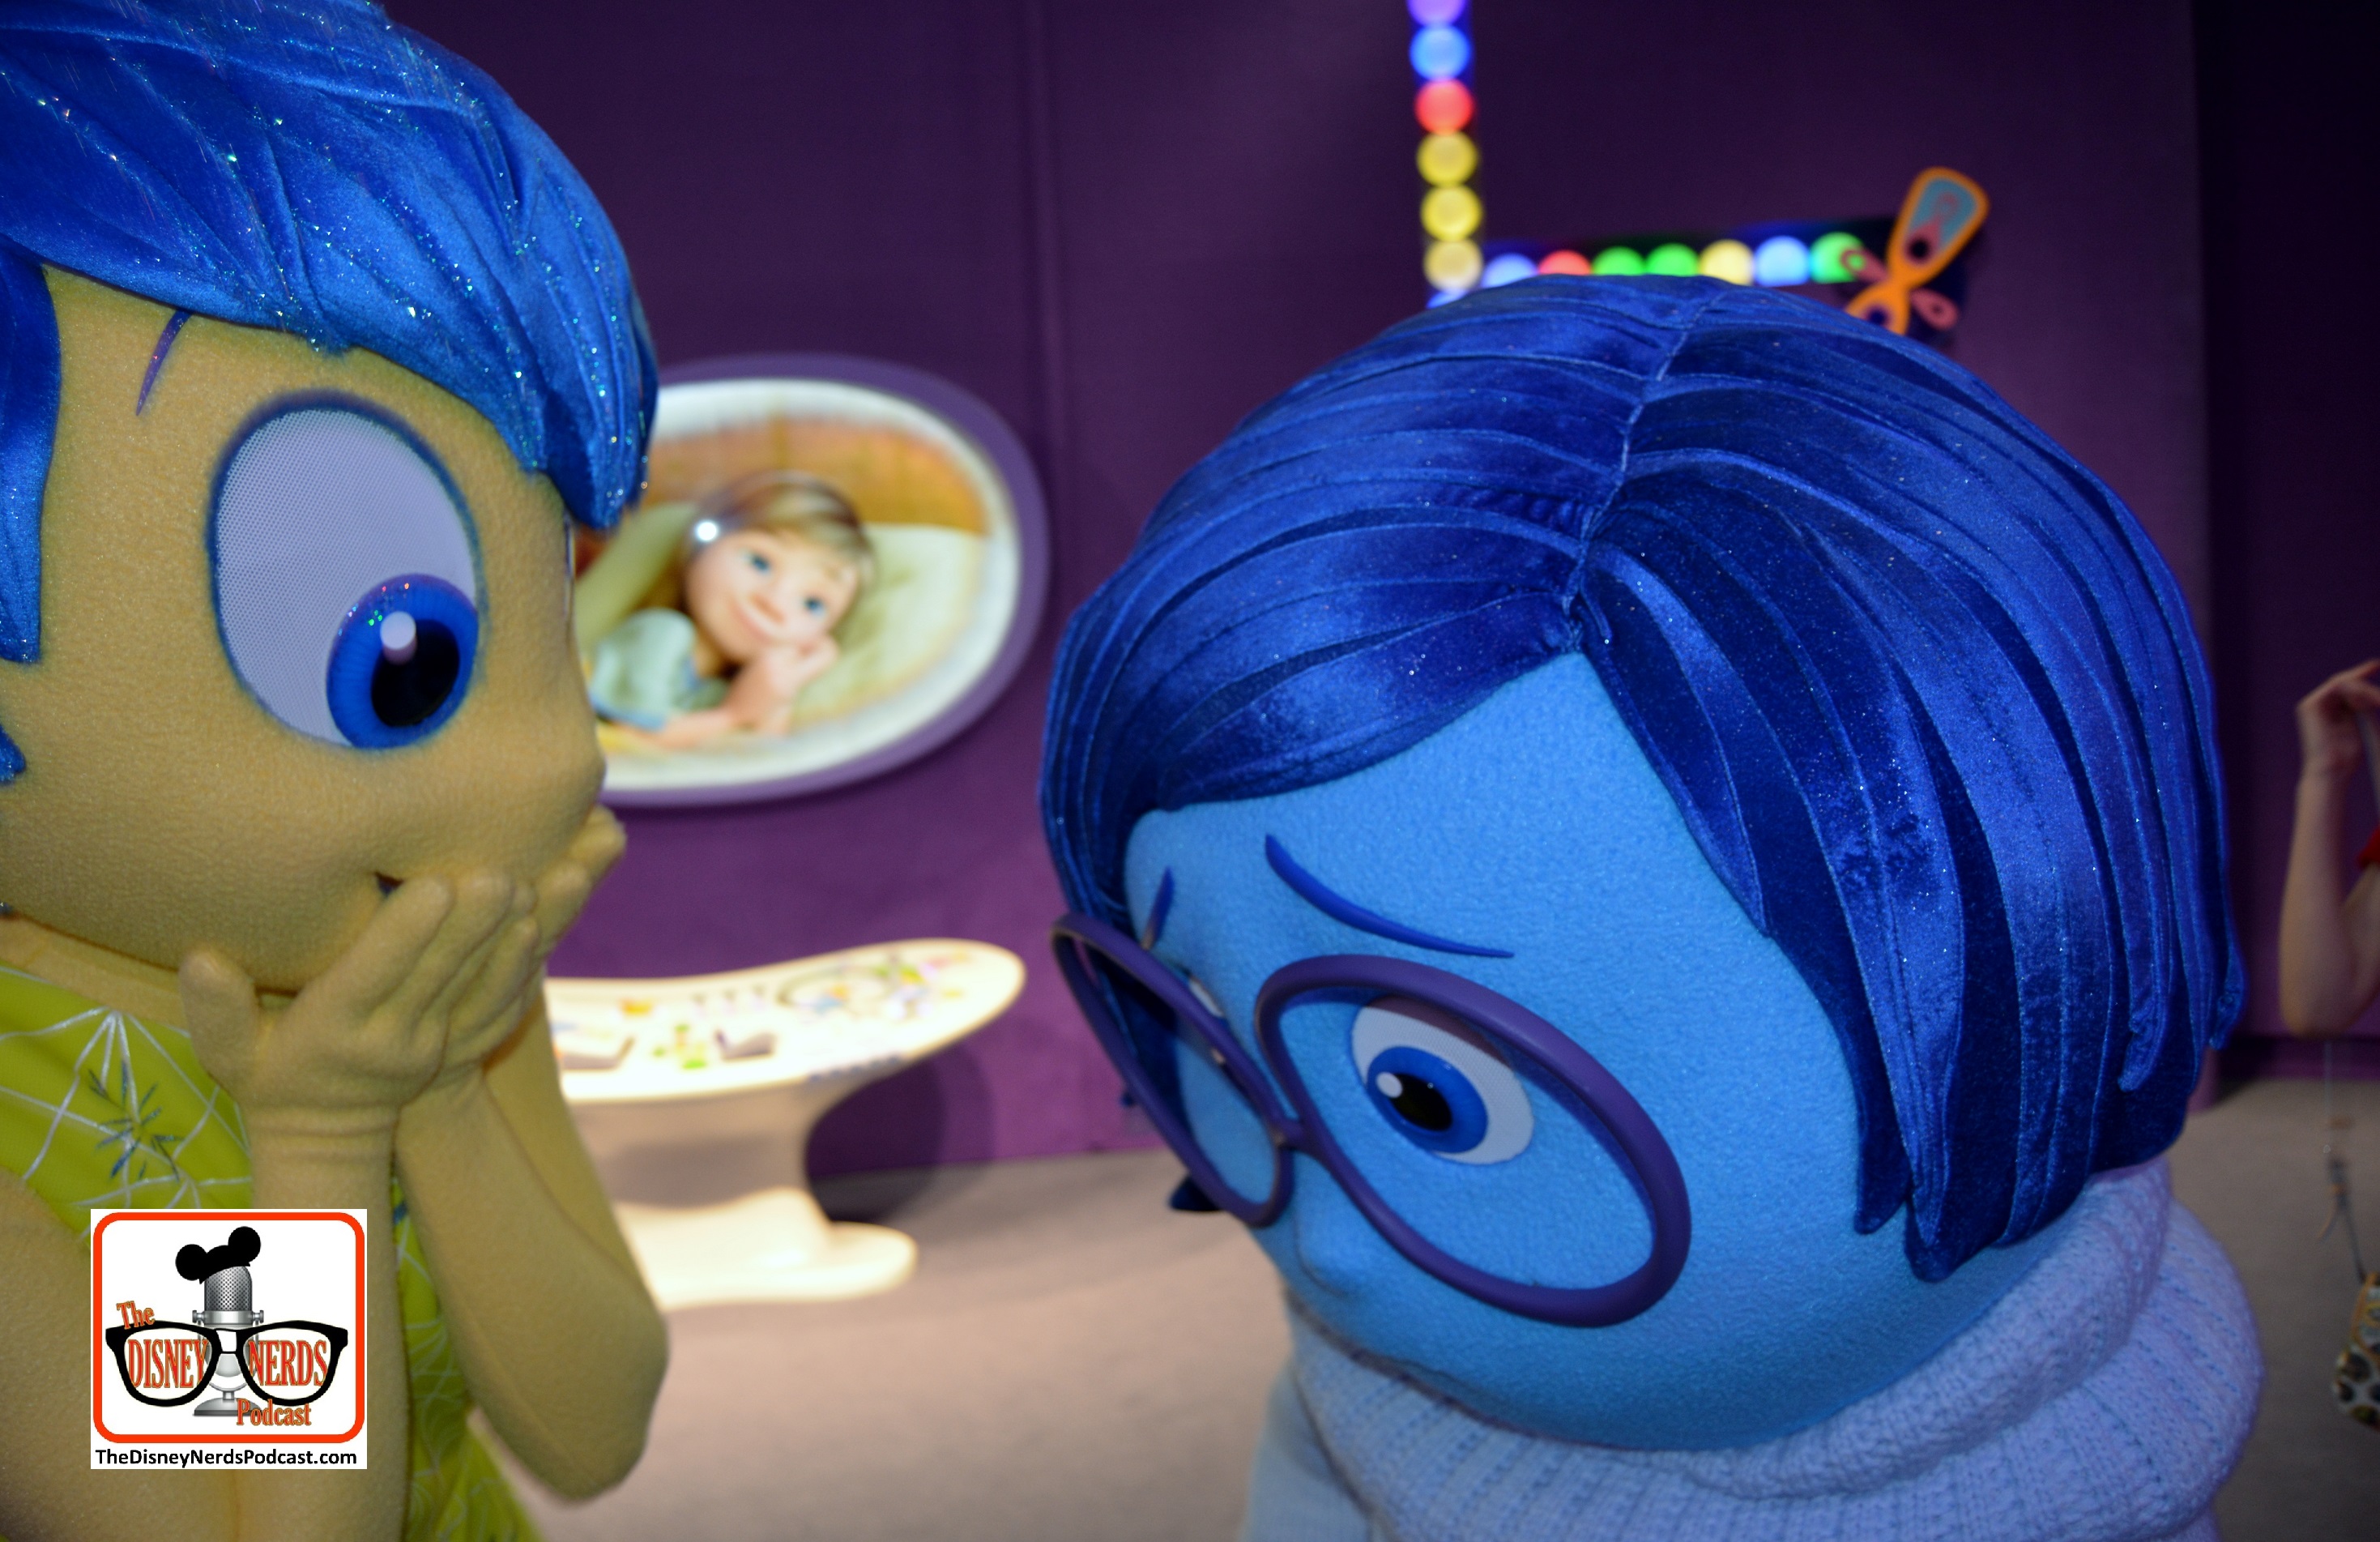 DNP April 2016 Photo Report: Epcot Inside-out meet and greet - Joy and Sadness